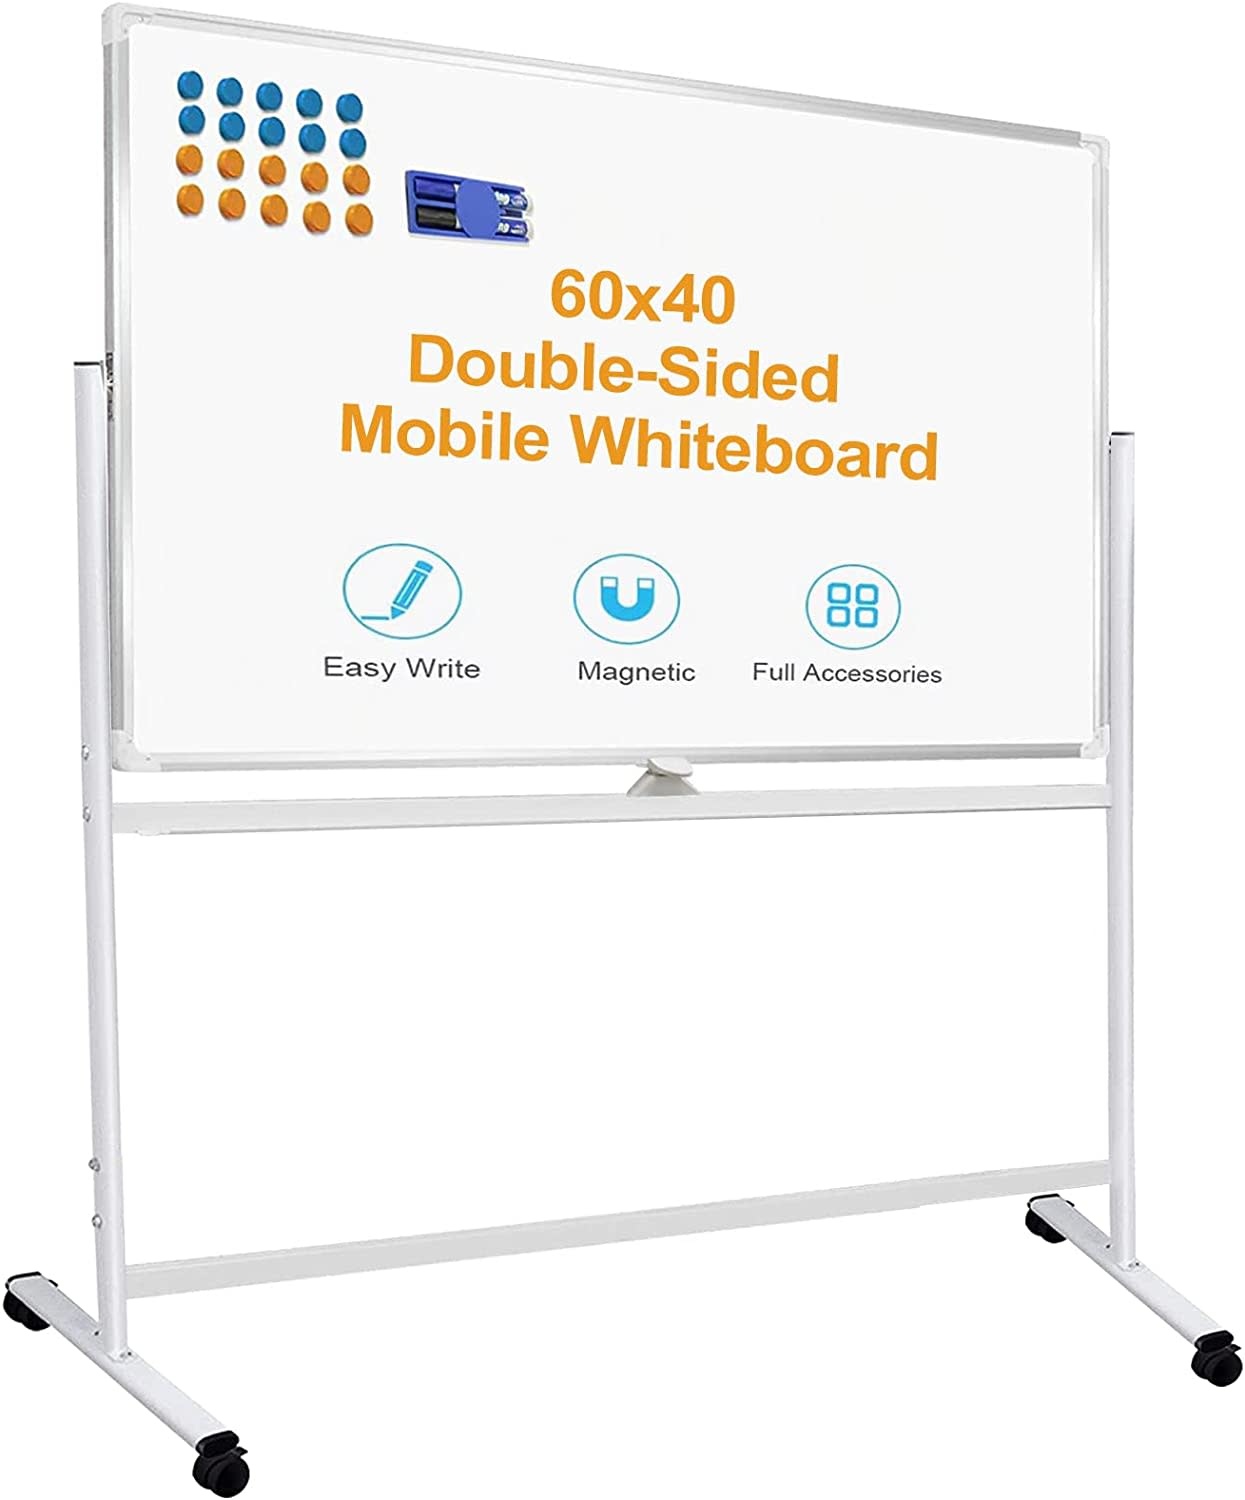 Primary School Portable Magnetic Whiteboard for Wall Dry Erase